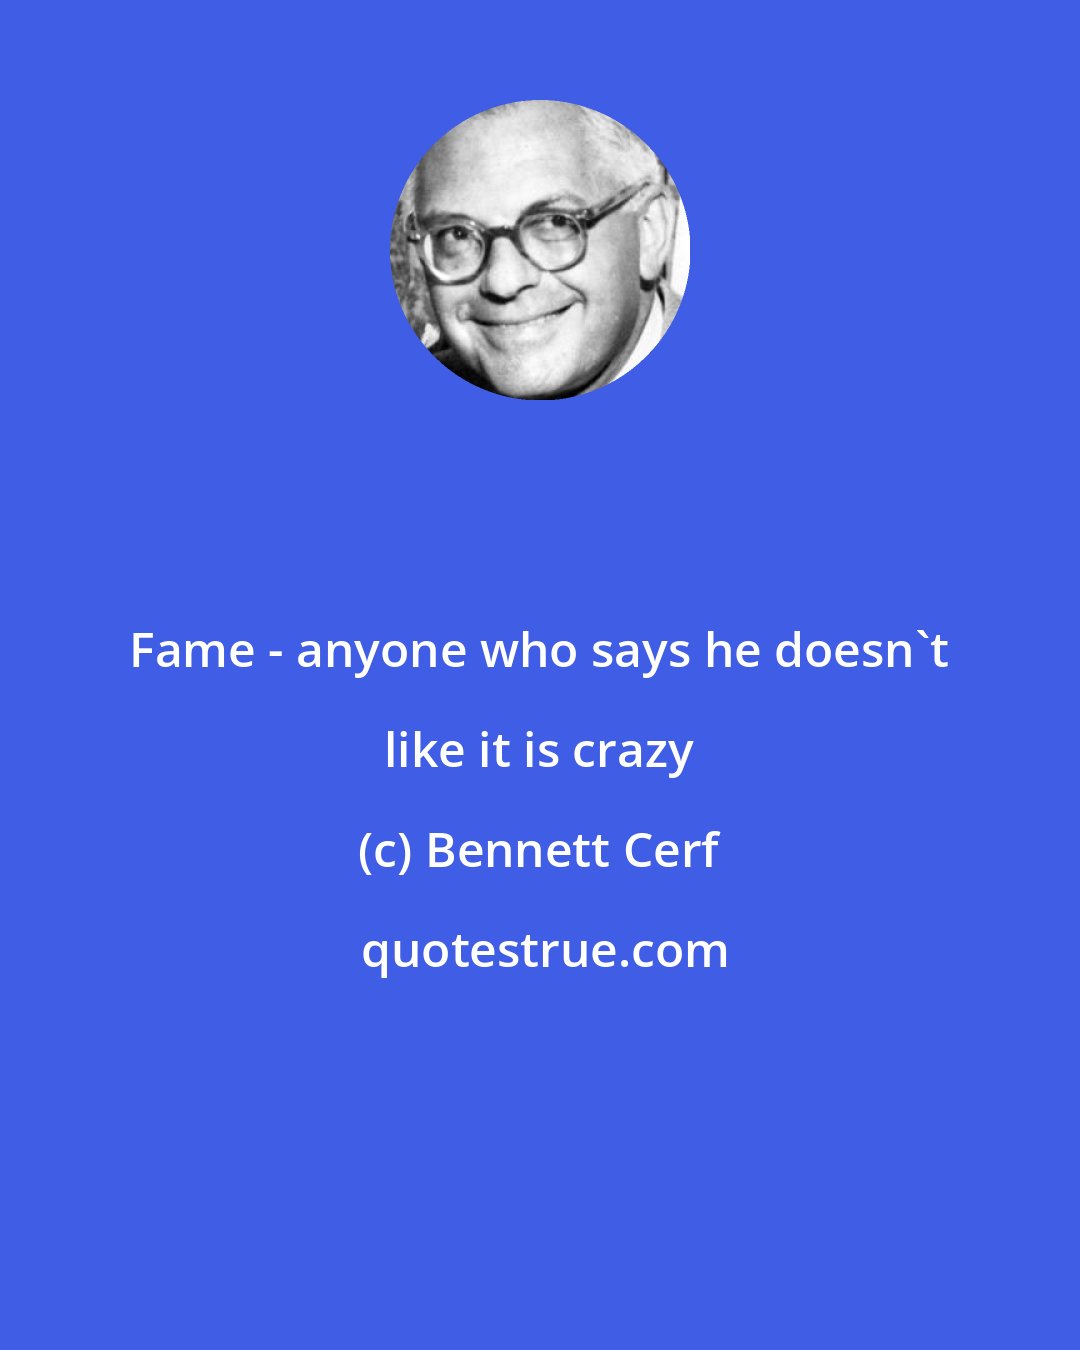 Bennett Cerf: Fame - anyone who says he doesn't like it is crazy